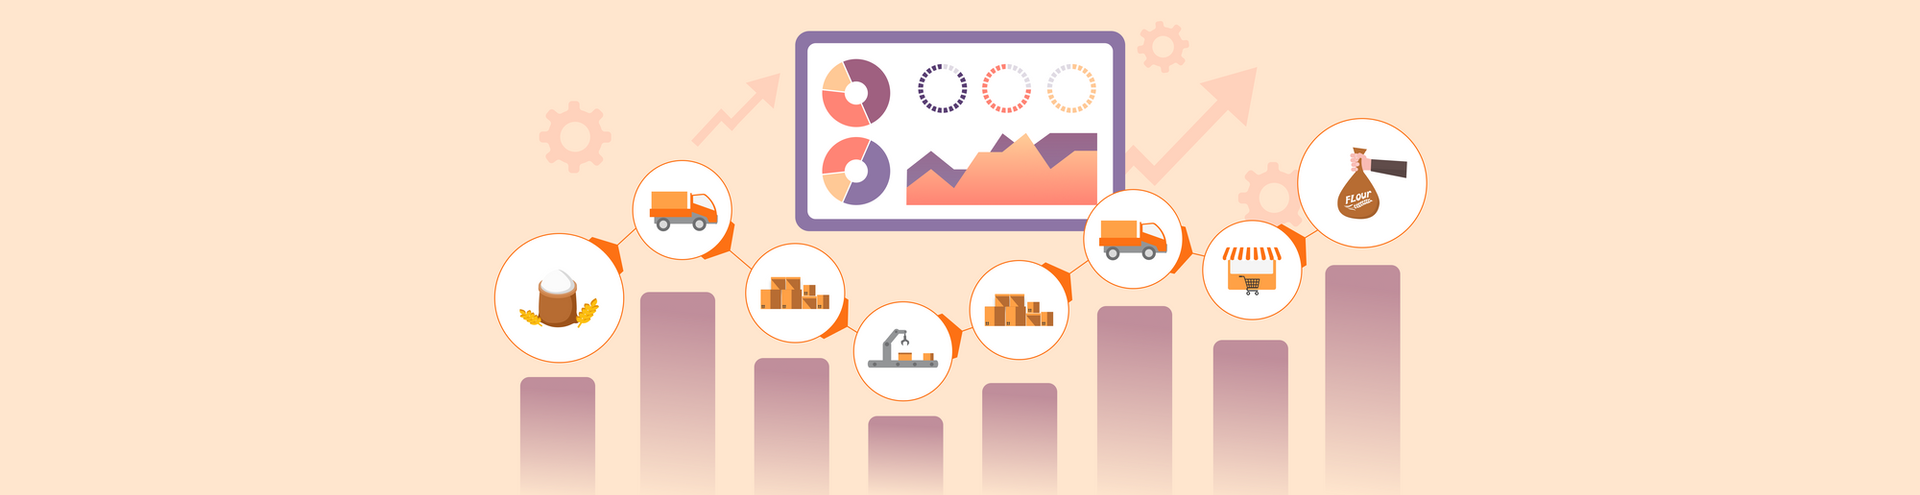 How to Build Your Supply Chain Metrics Dashboard to Make Better Business Trade-offs